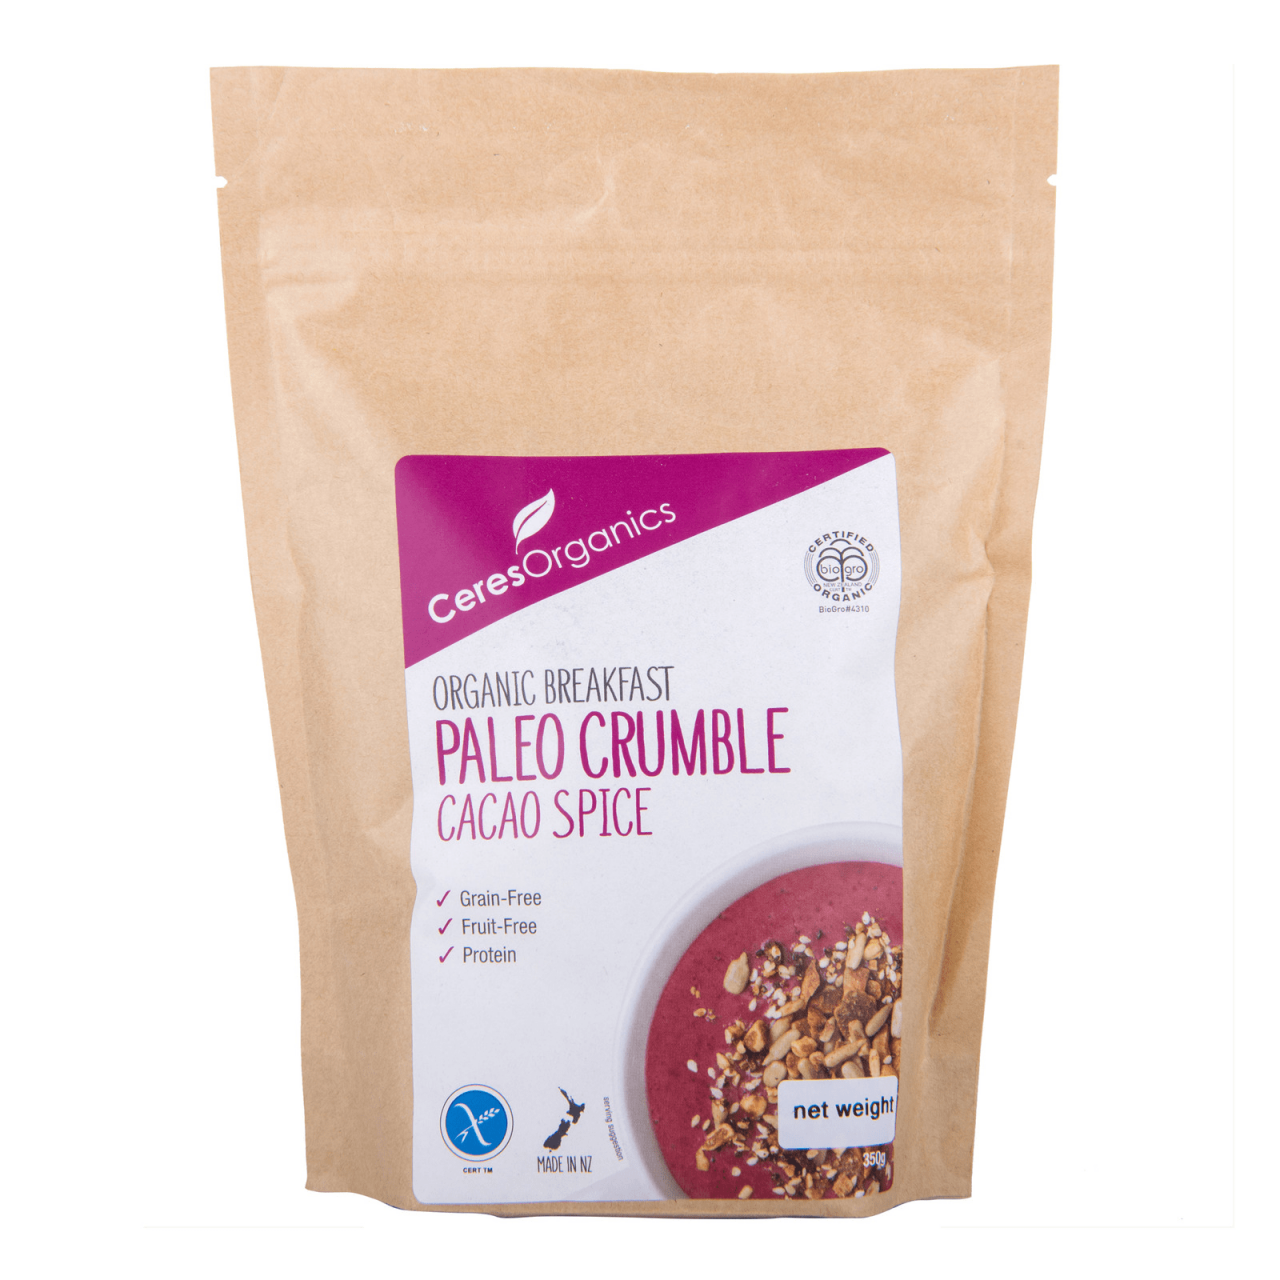 Fairprice On Paleco Crumble Cacao spice